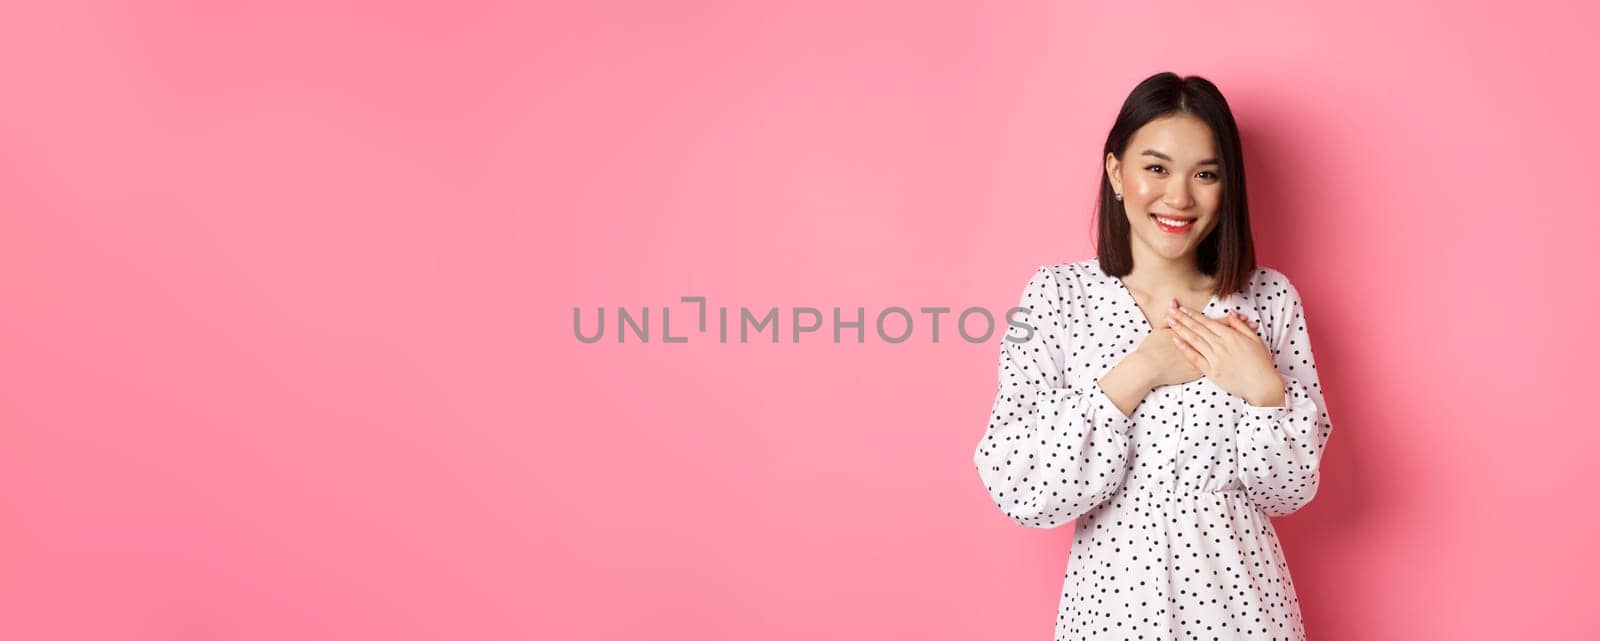 Thankful Korean girl in dress smiling, holding hands on heart and looking grateful at camera, touched with nice gesture, standing over pink background.